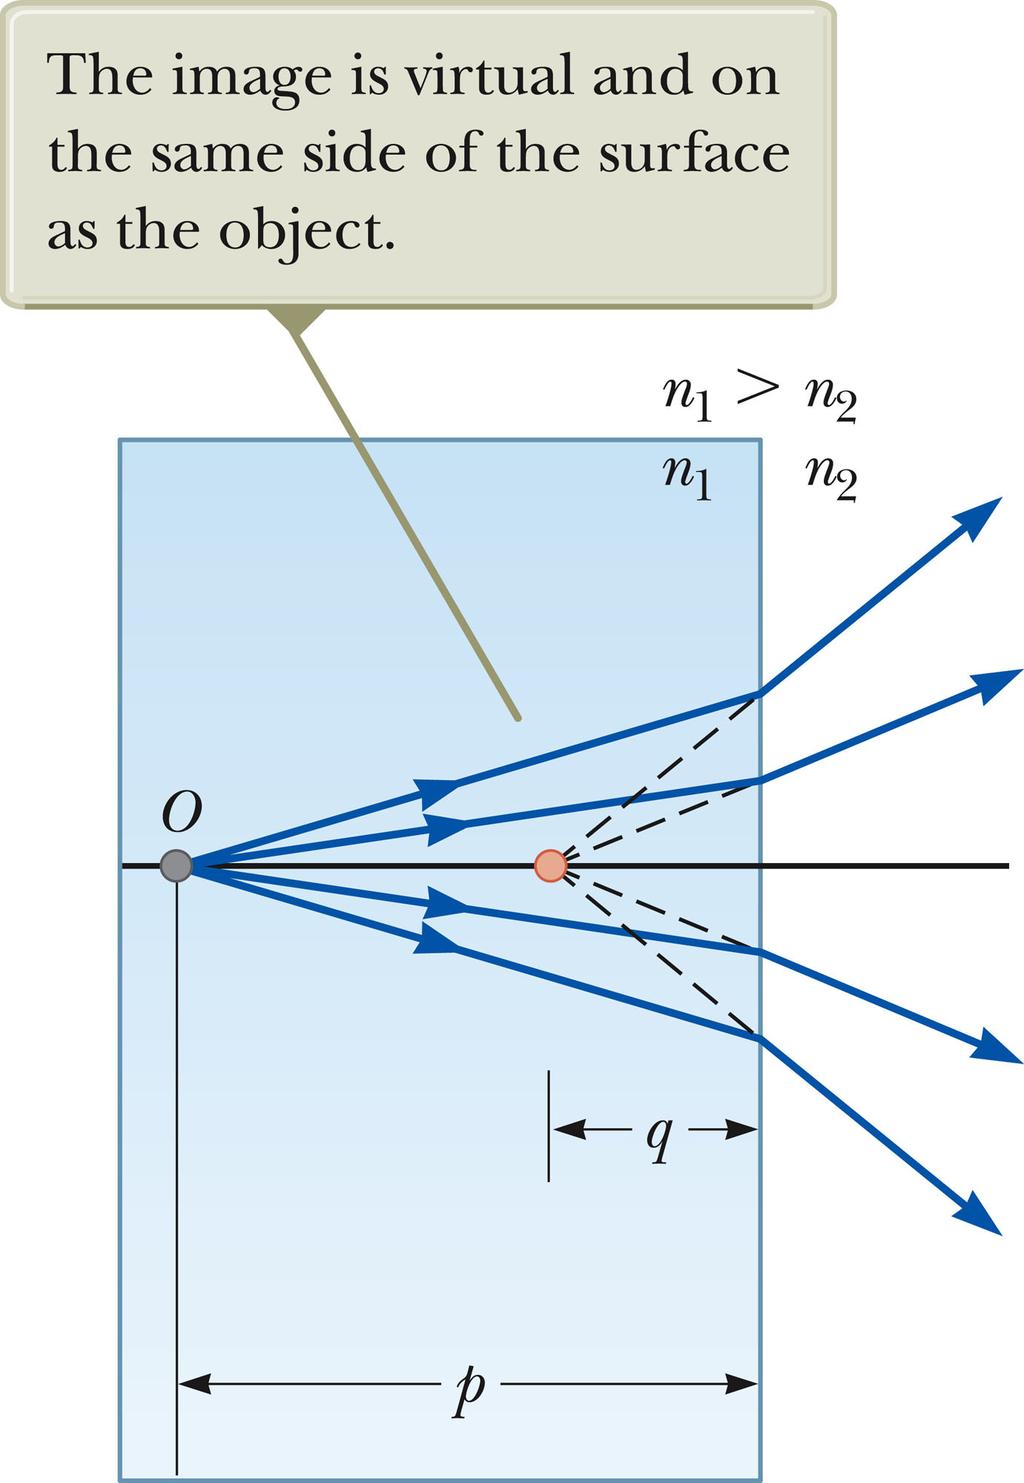 Images Formed by Refraction, 3 Sign Conventions for Refracting Surfaces The side of the surface in which the light rays originate is defined as the front side. The other side is called the back side.